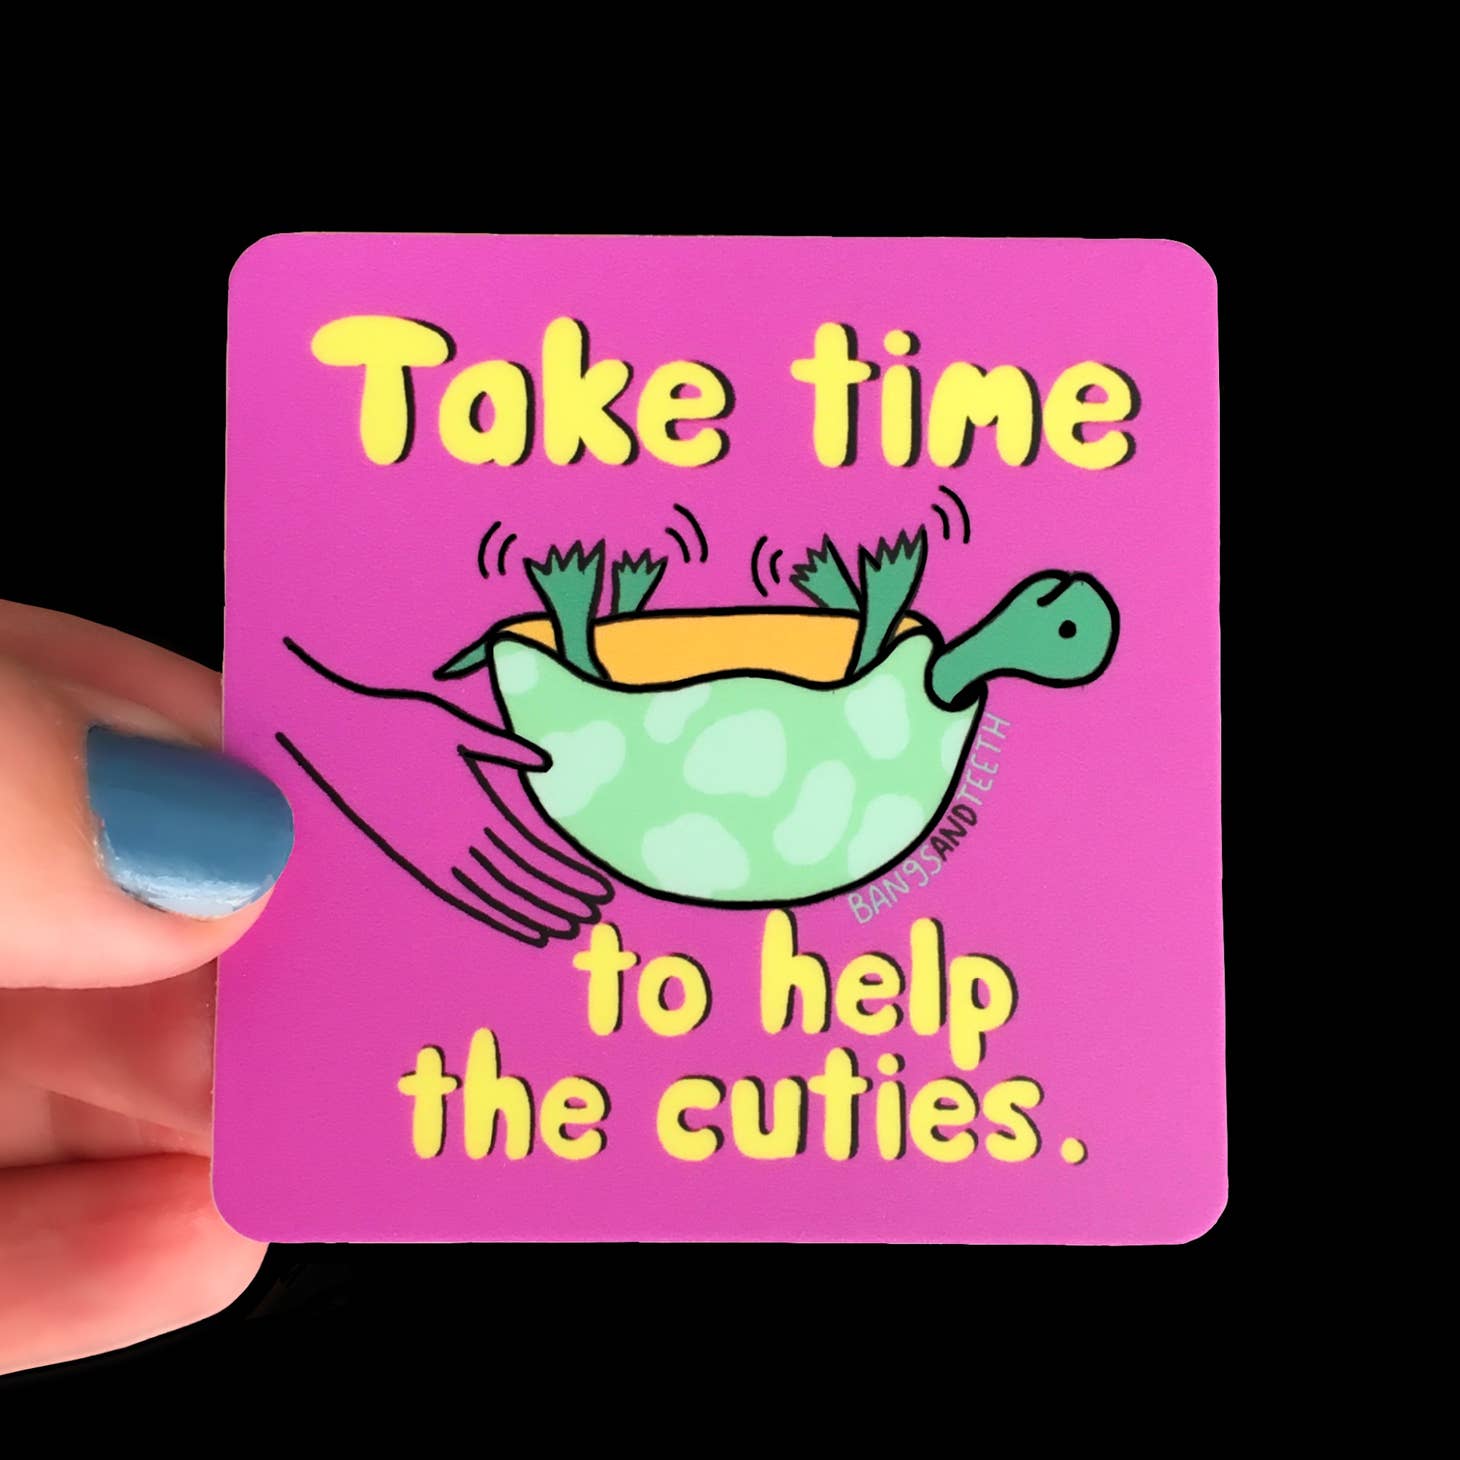 Square sticker with pink background with image of green turtle upside down. Yellow text says, "Take time to help the cuties.".